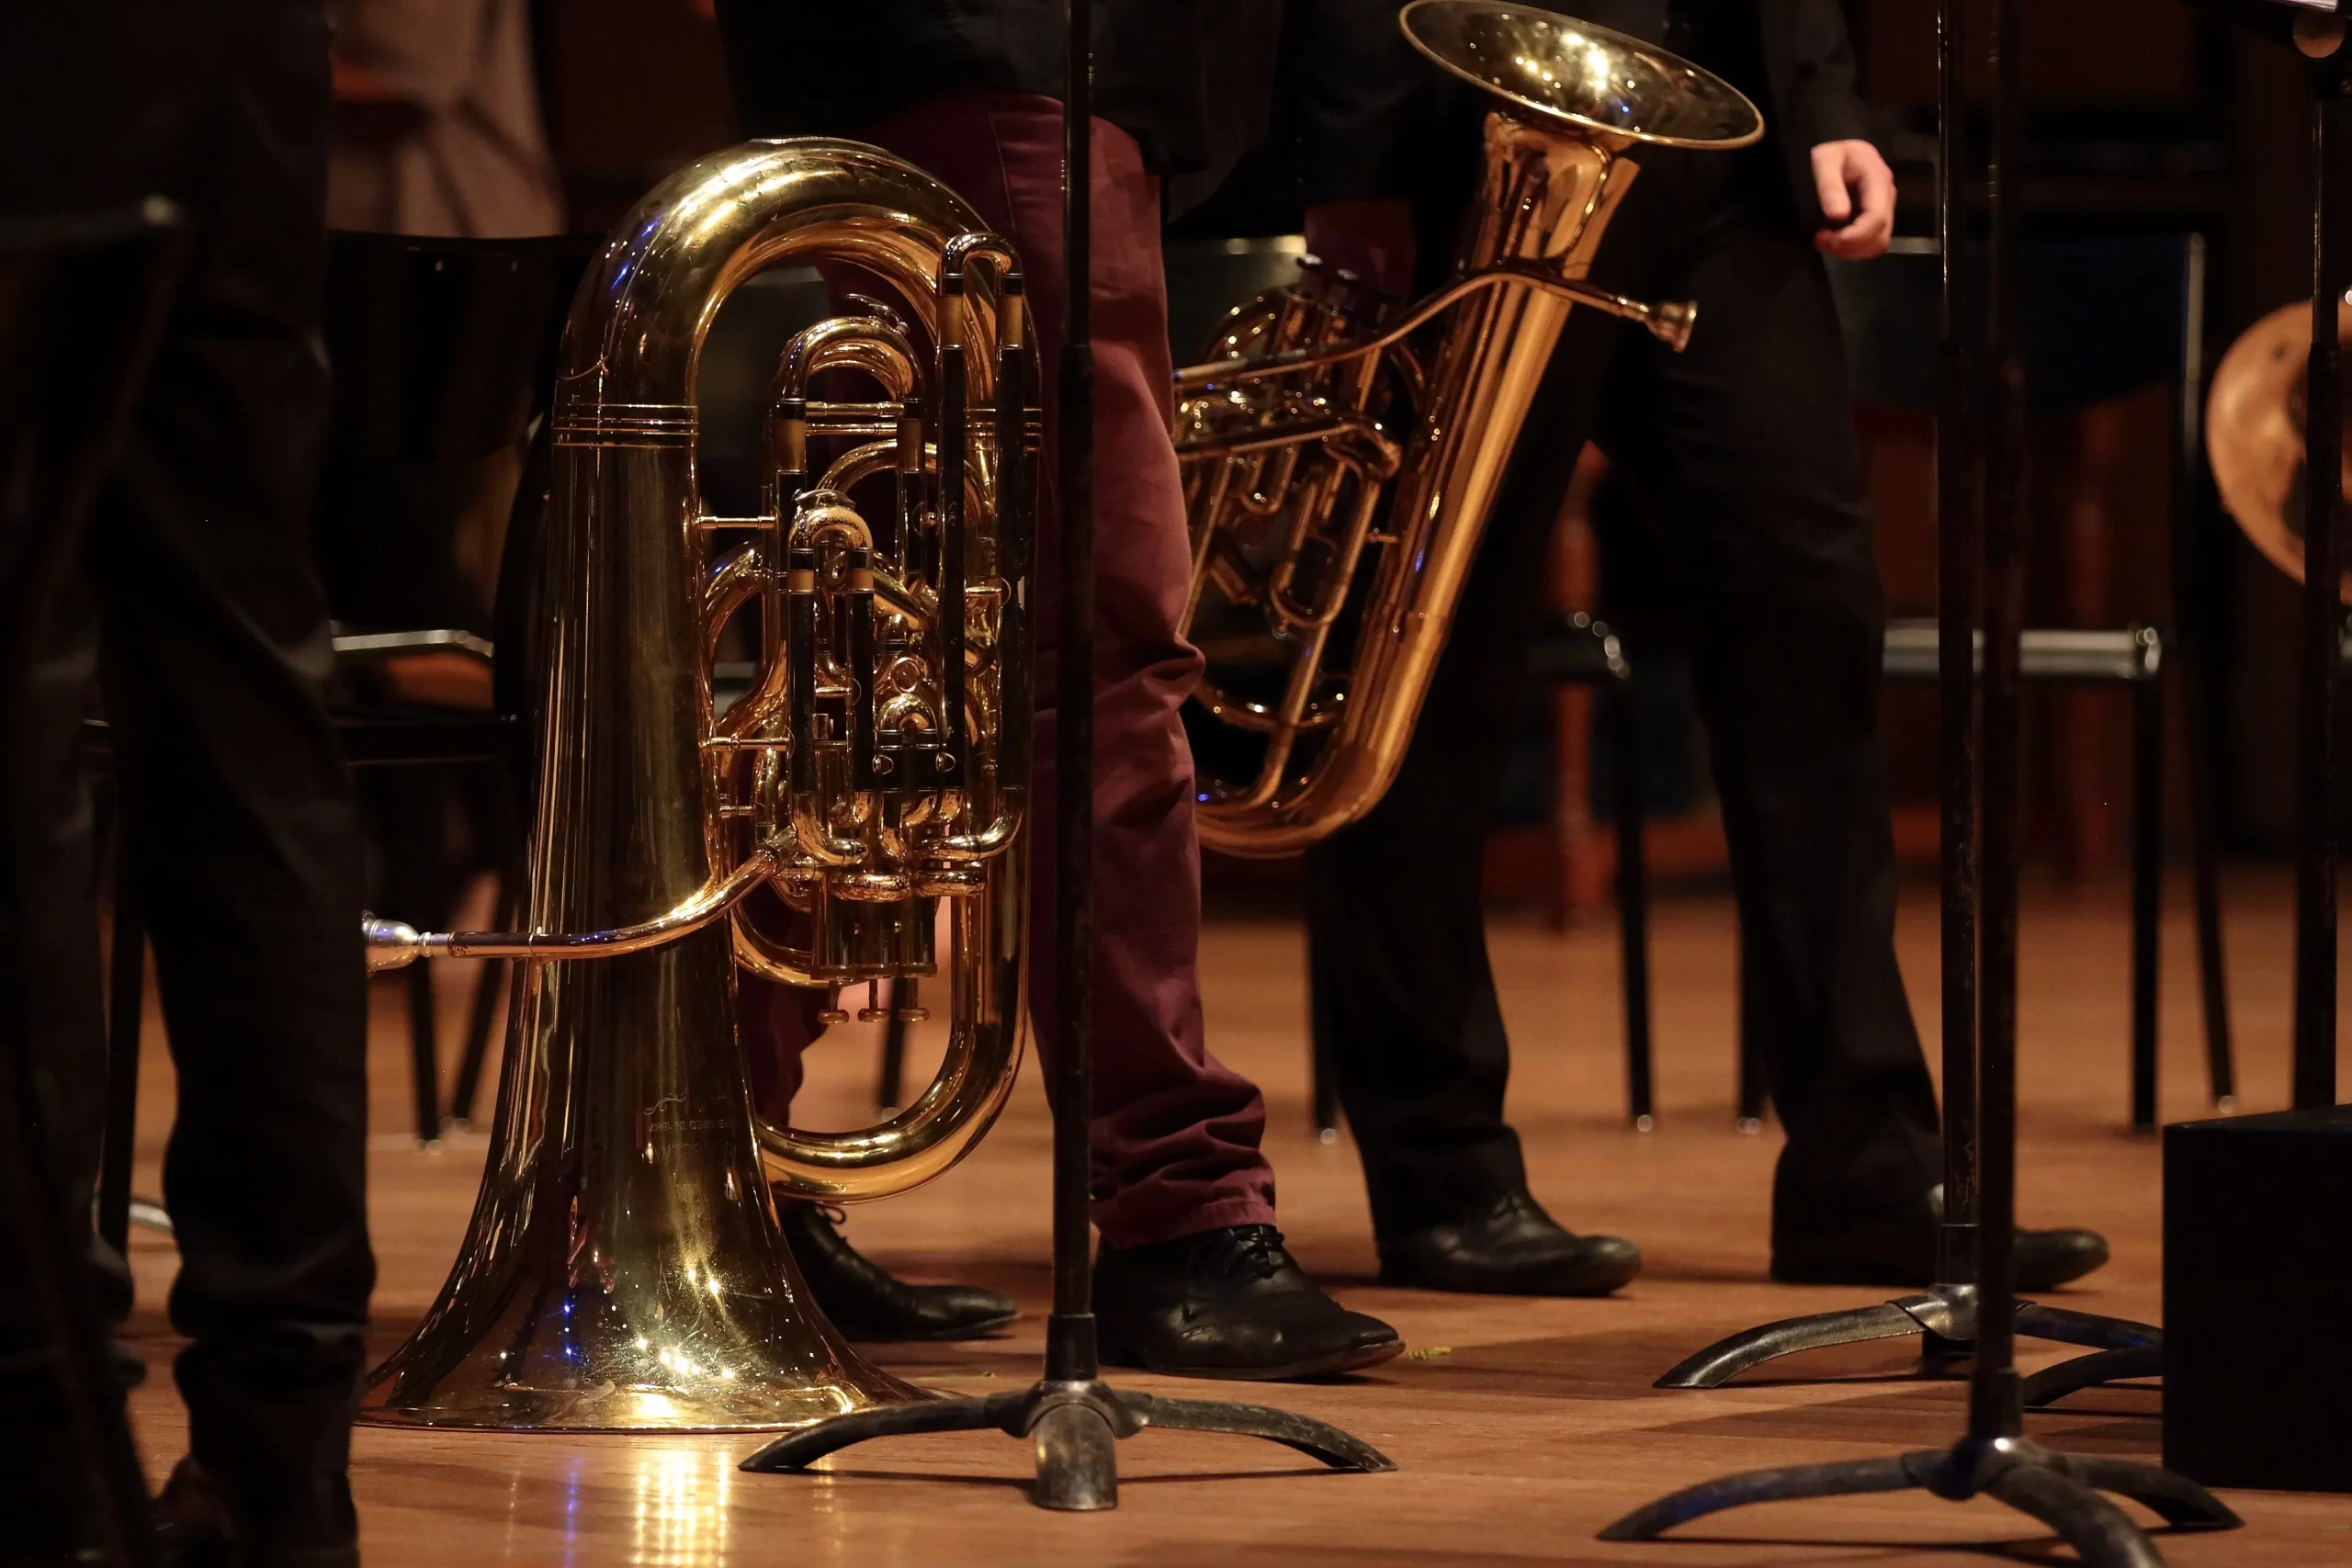 A Trombone instrument being played at a concert hall